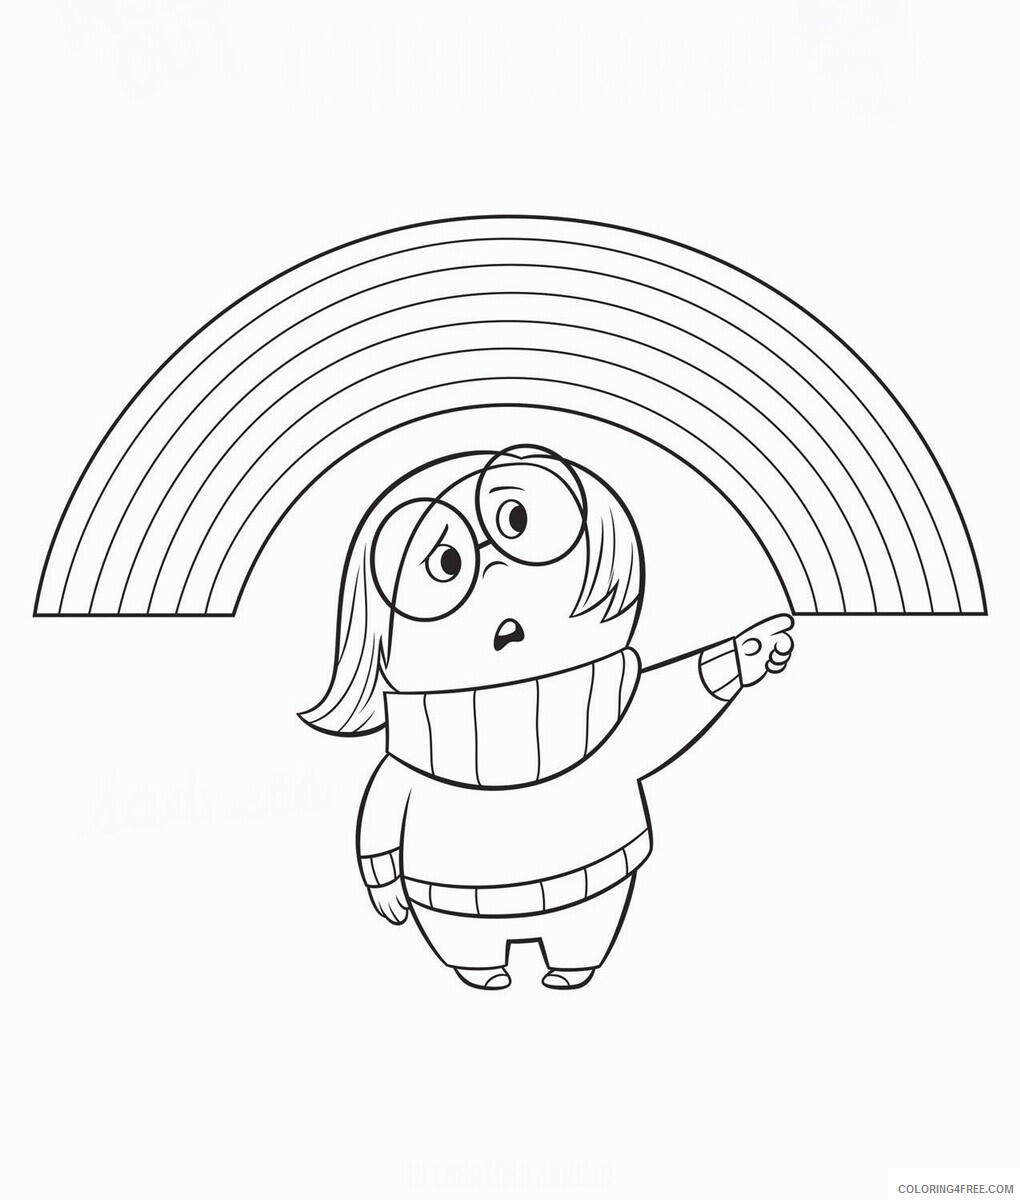 Inside Out Coloring Pages TV Film InsideOut_coloring_17 Printable 2020 03962 Coloring4free